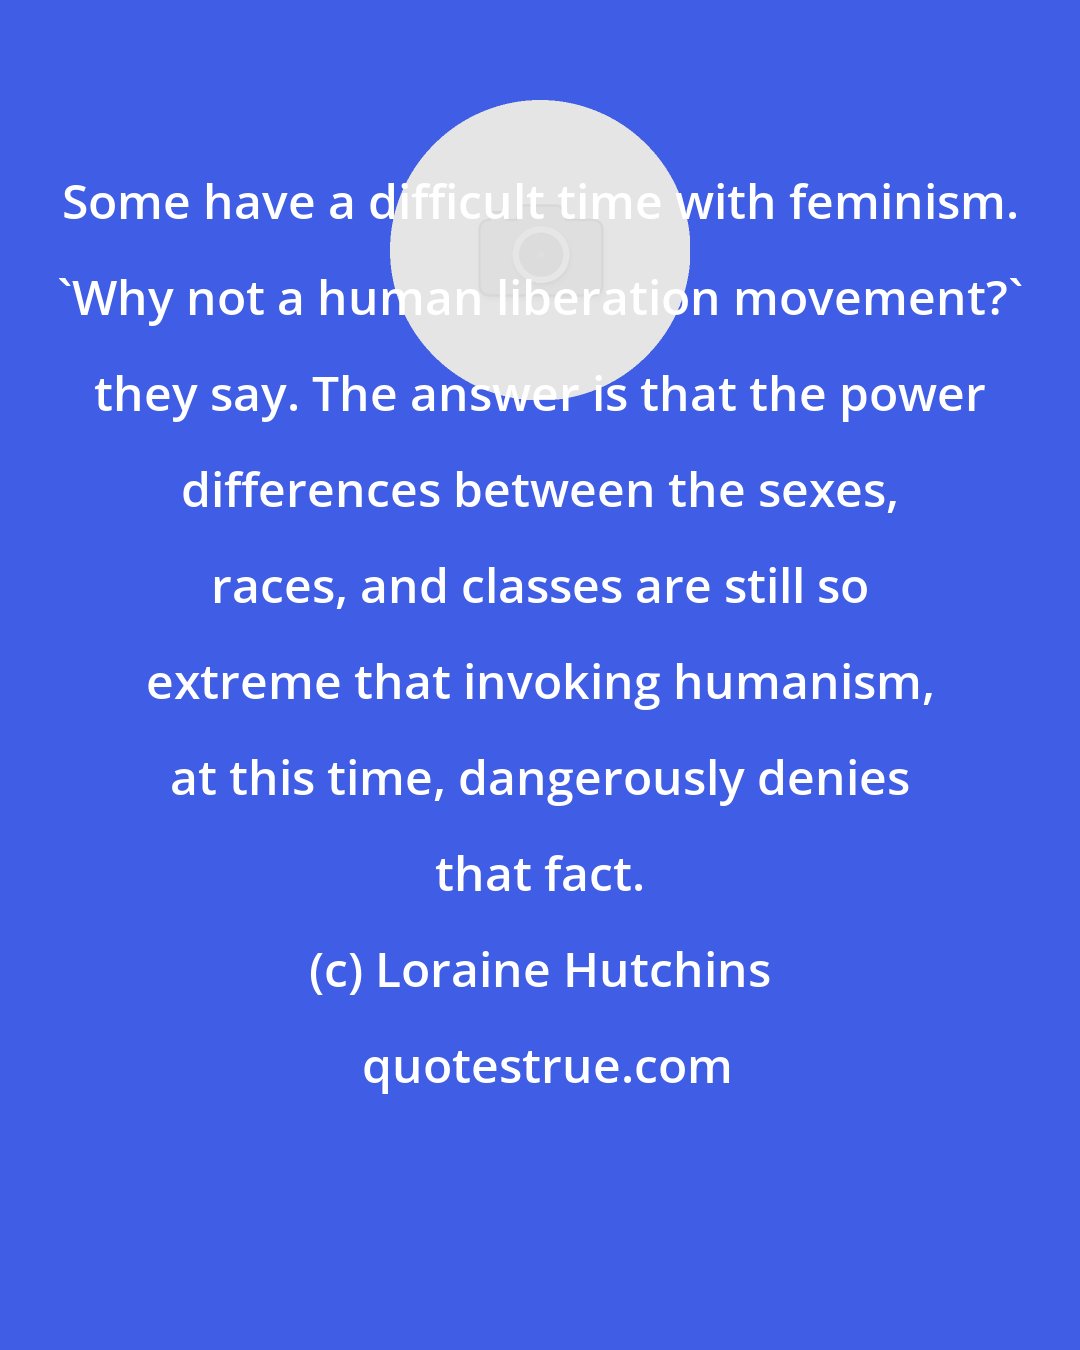 Loraine Hutchins: Some have a difficult time with feminism. 'Why not a human liberation movement?' they say. The answer is that the power differences between the sexes, races, and classes are still so extreme that invoking humanism, at this time, dangerously denies that fact.